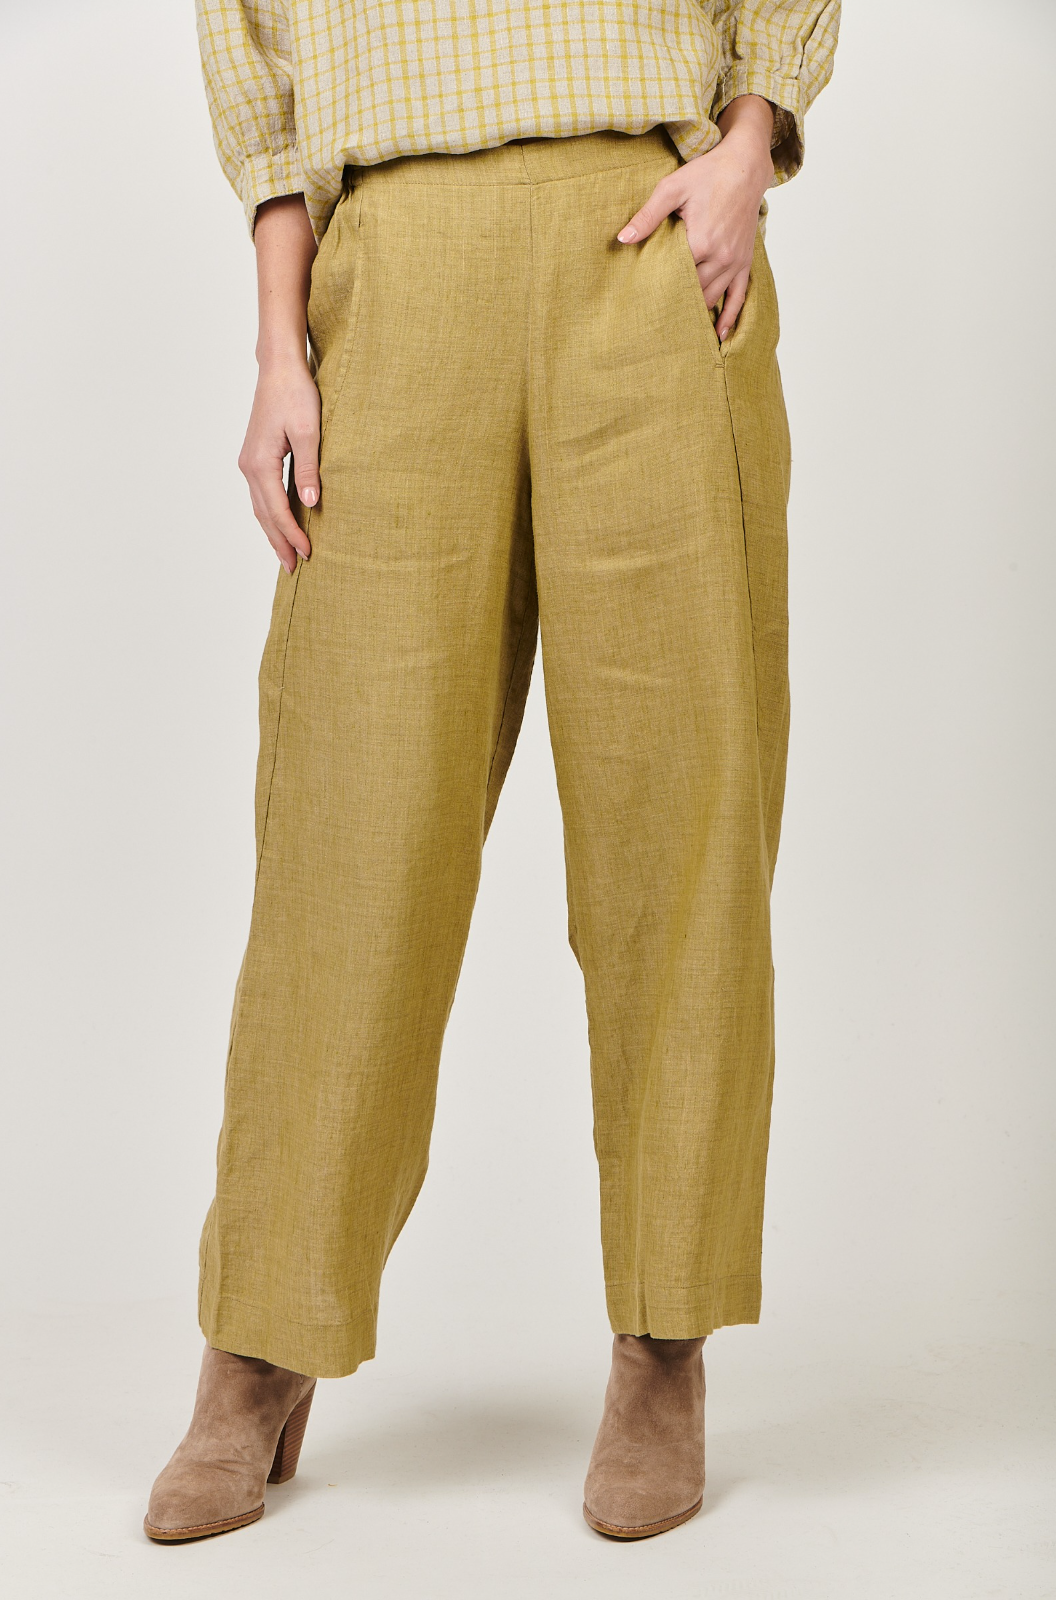 Naturals by O & J Linen Pant in Peridot